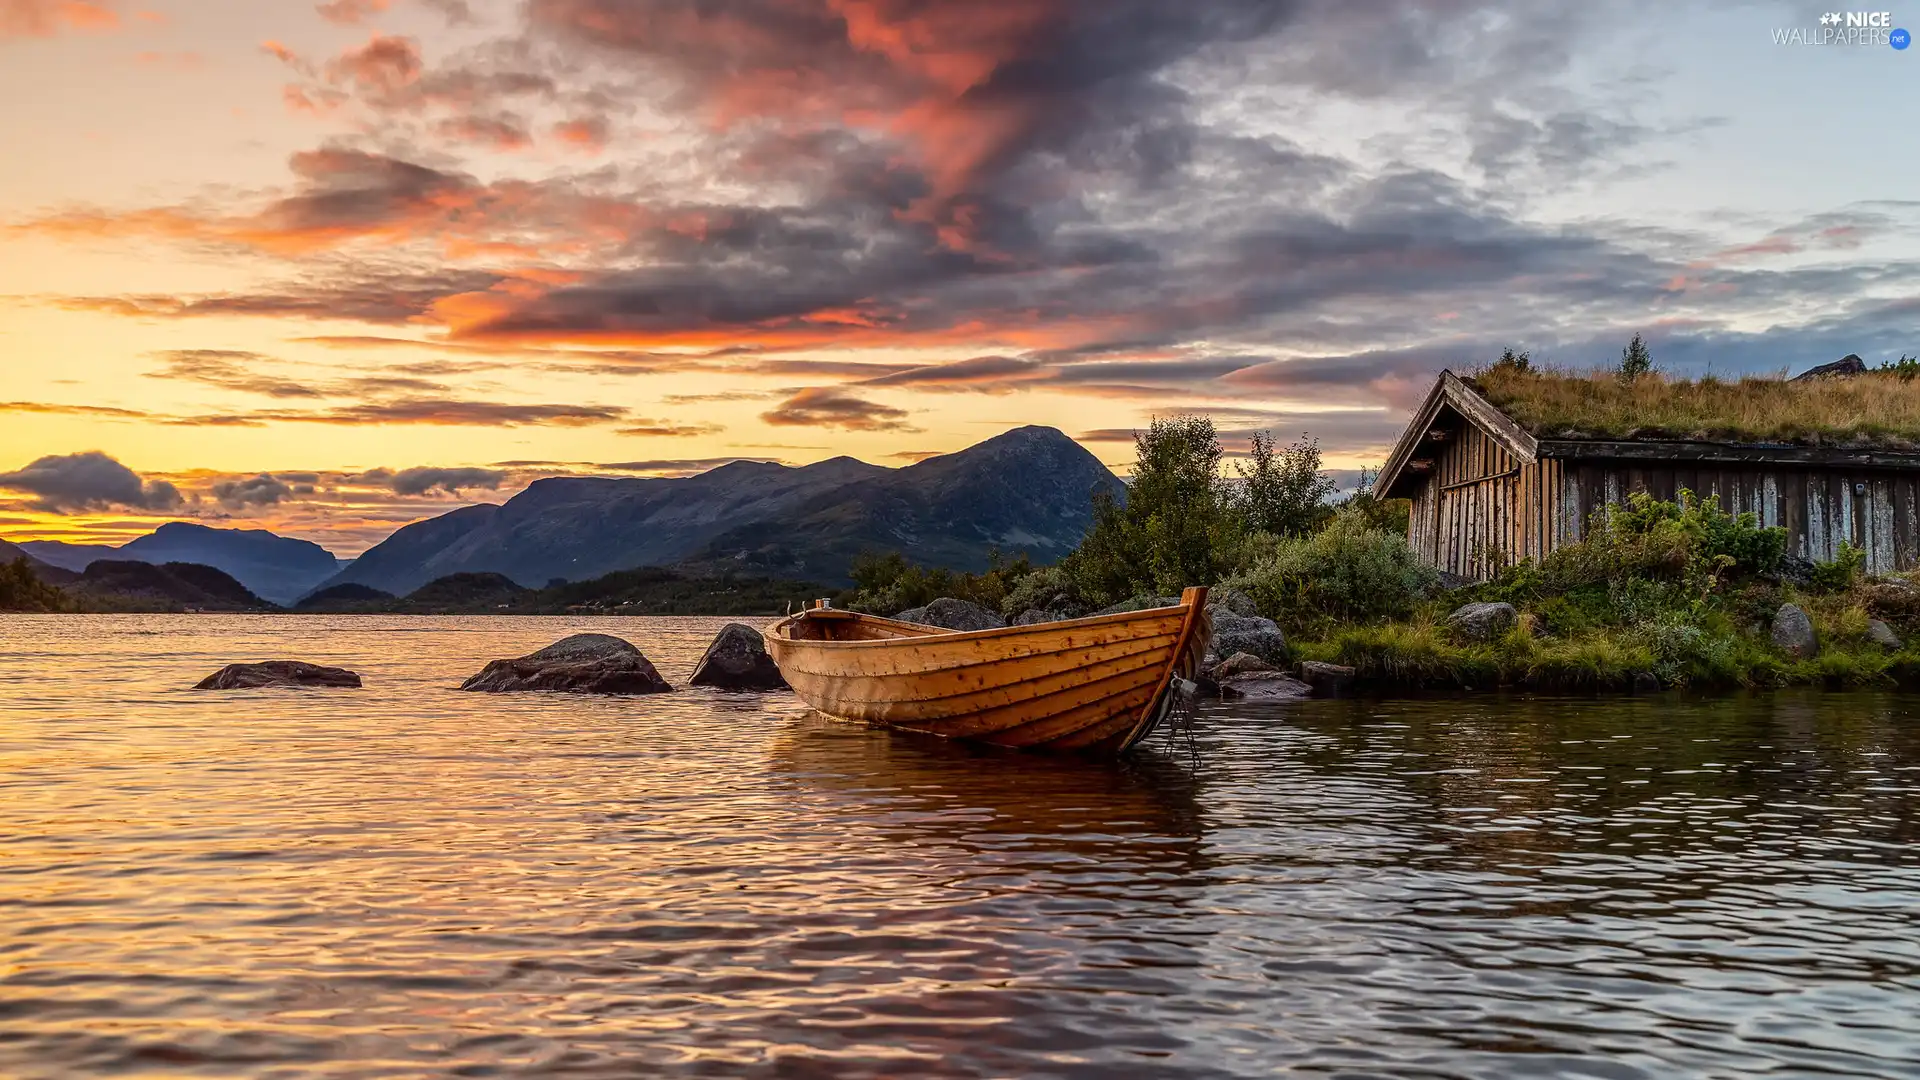 lake, Mountains, Stones, Boat, Bush, clouds, Great Sunsets, cote